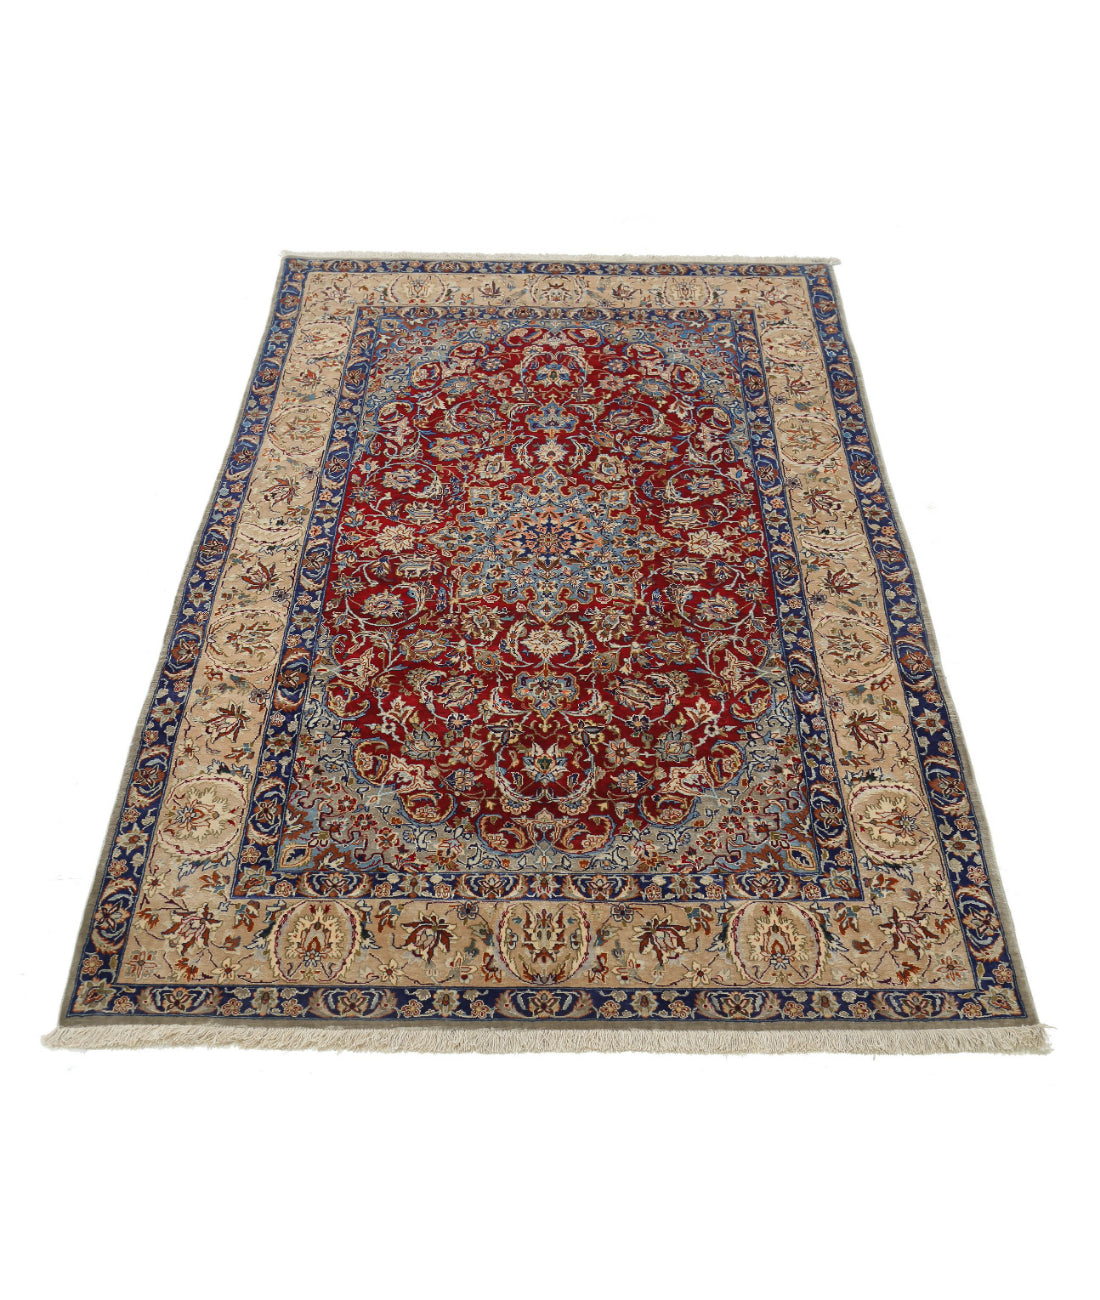 Hand Knotted Masterpiece Persian Isfahan Wool & Silk Rug - 3'7'' x 5'8'' 3'7'' x 5'8'' (108 X 170) / Red / Taupe